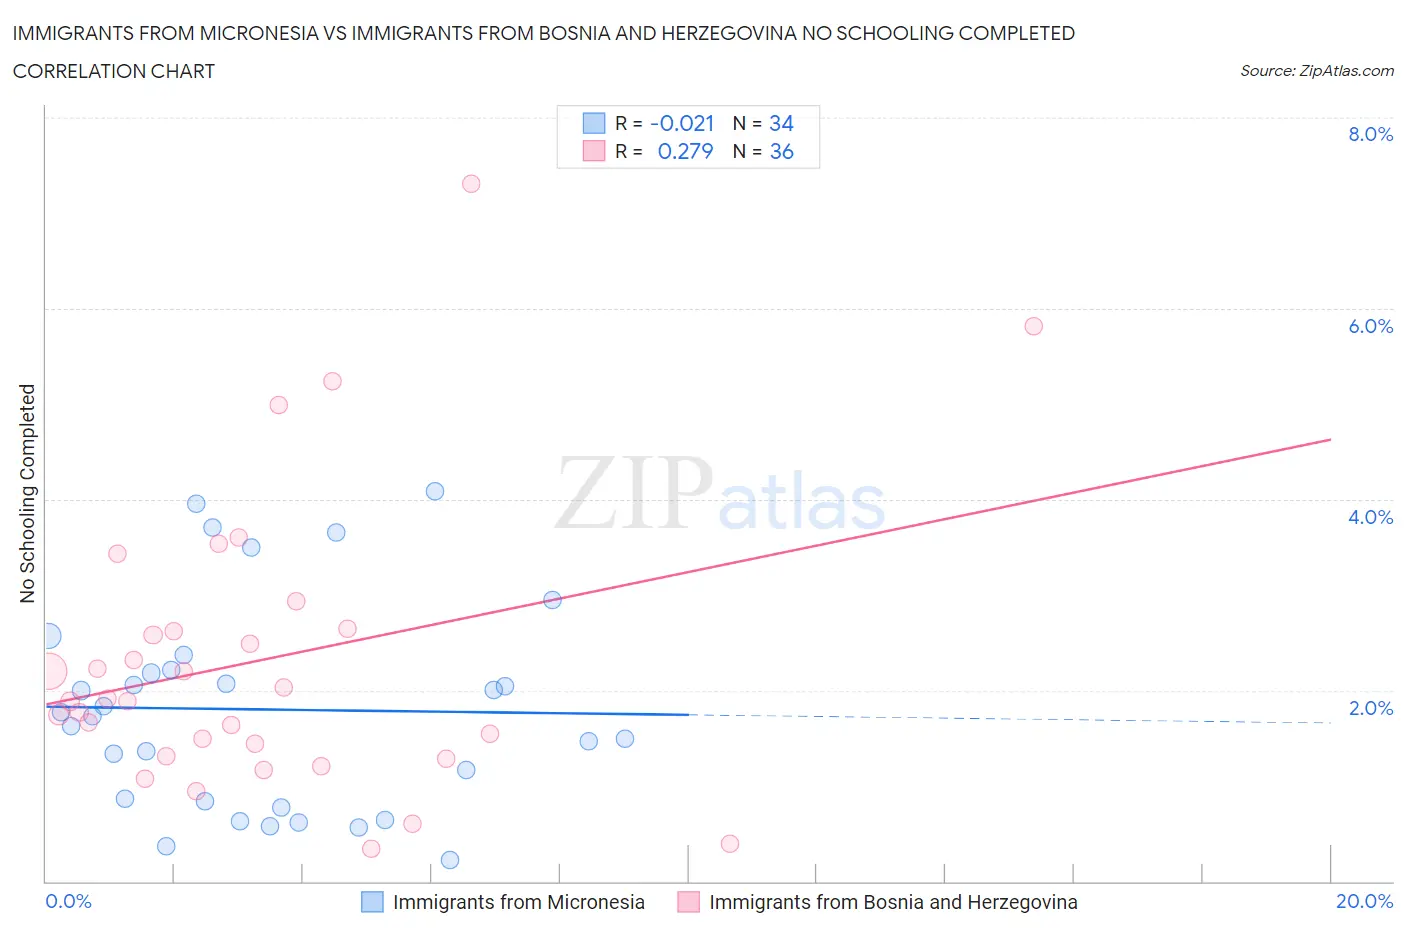 Immigrants from Micronesia vs Immigrants from Bosnia and Herzegovina No Schooling Completed